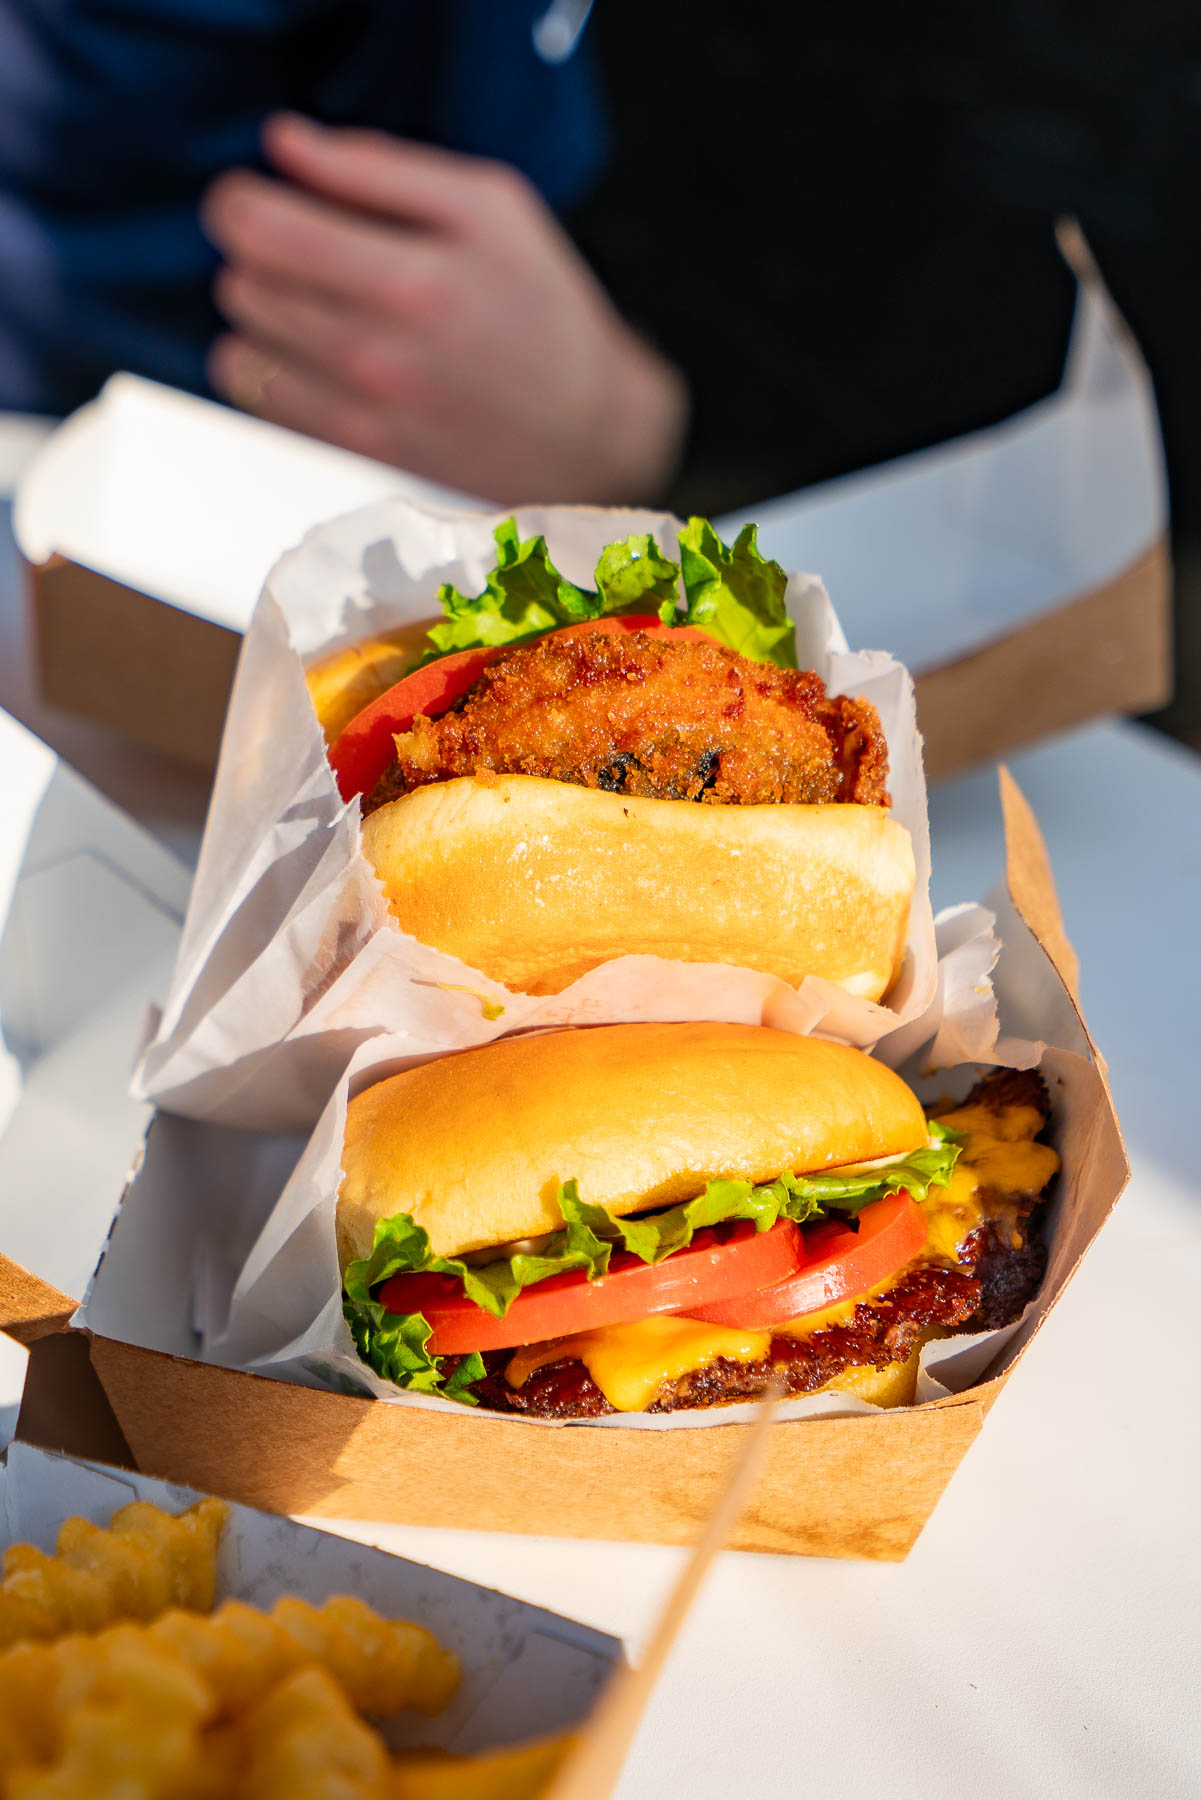 Chicken burger and cheeseburger from Shake Shack in NYC, things to do